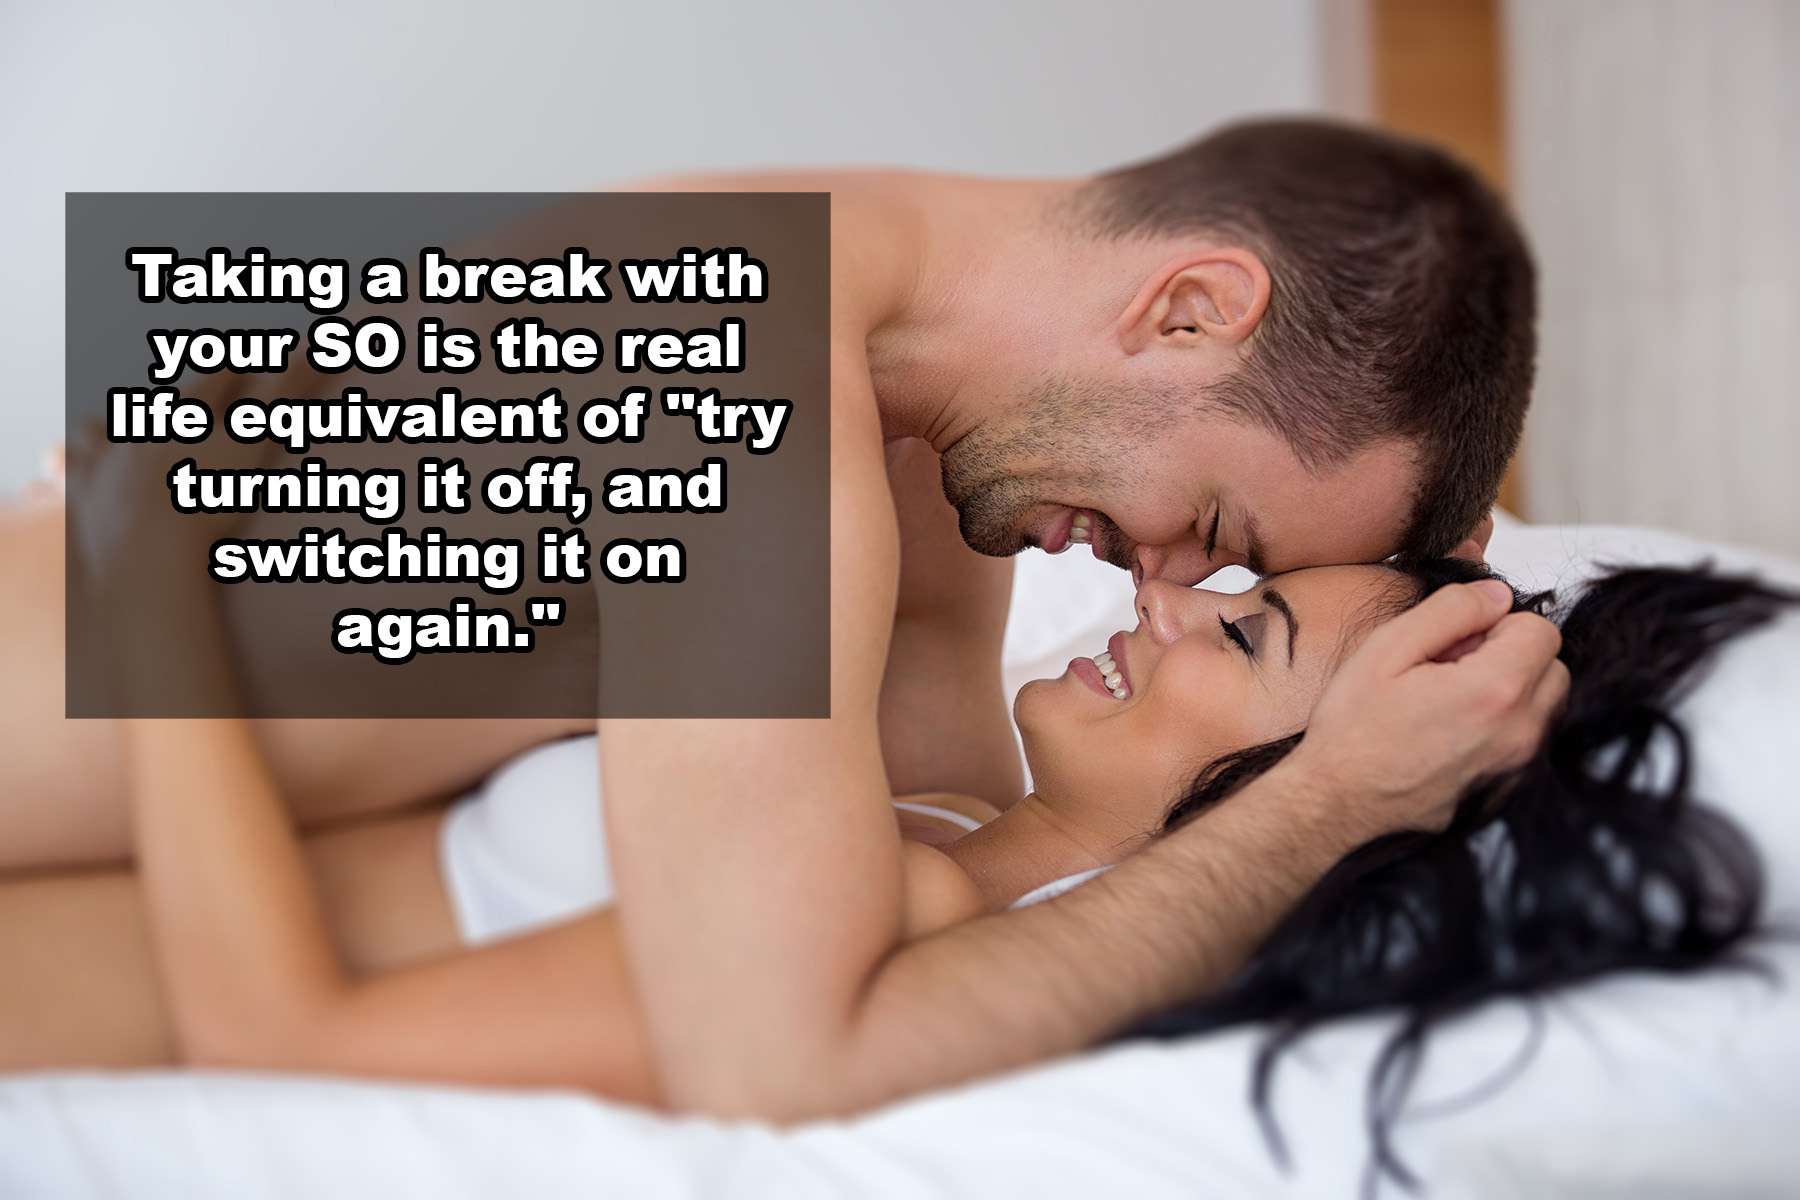 shower thoughts that will make you think - Taking a break with your So is the real life equivalent of "try turning it off, and switching it on again."